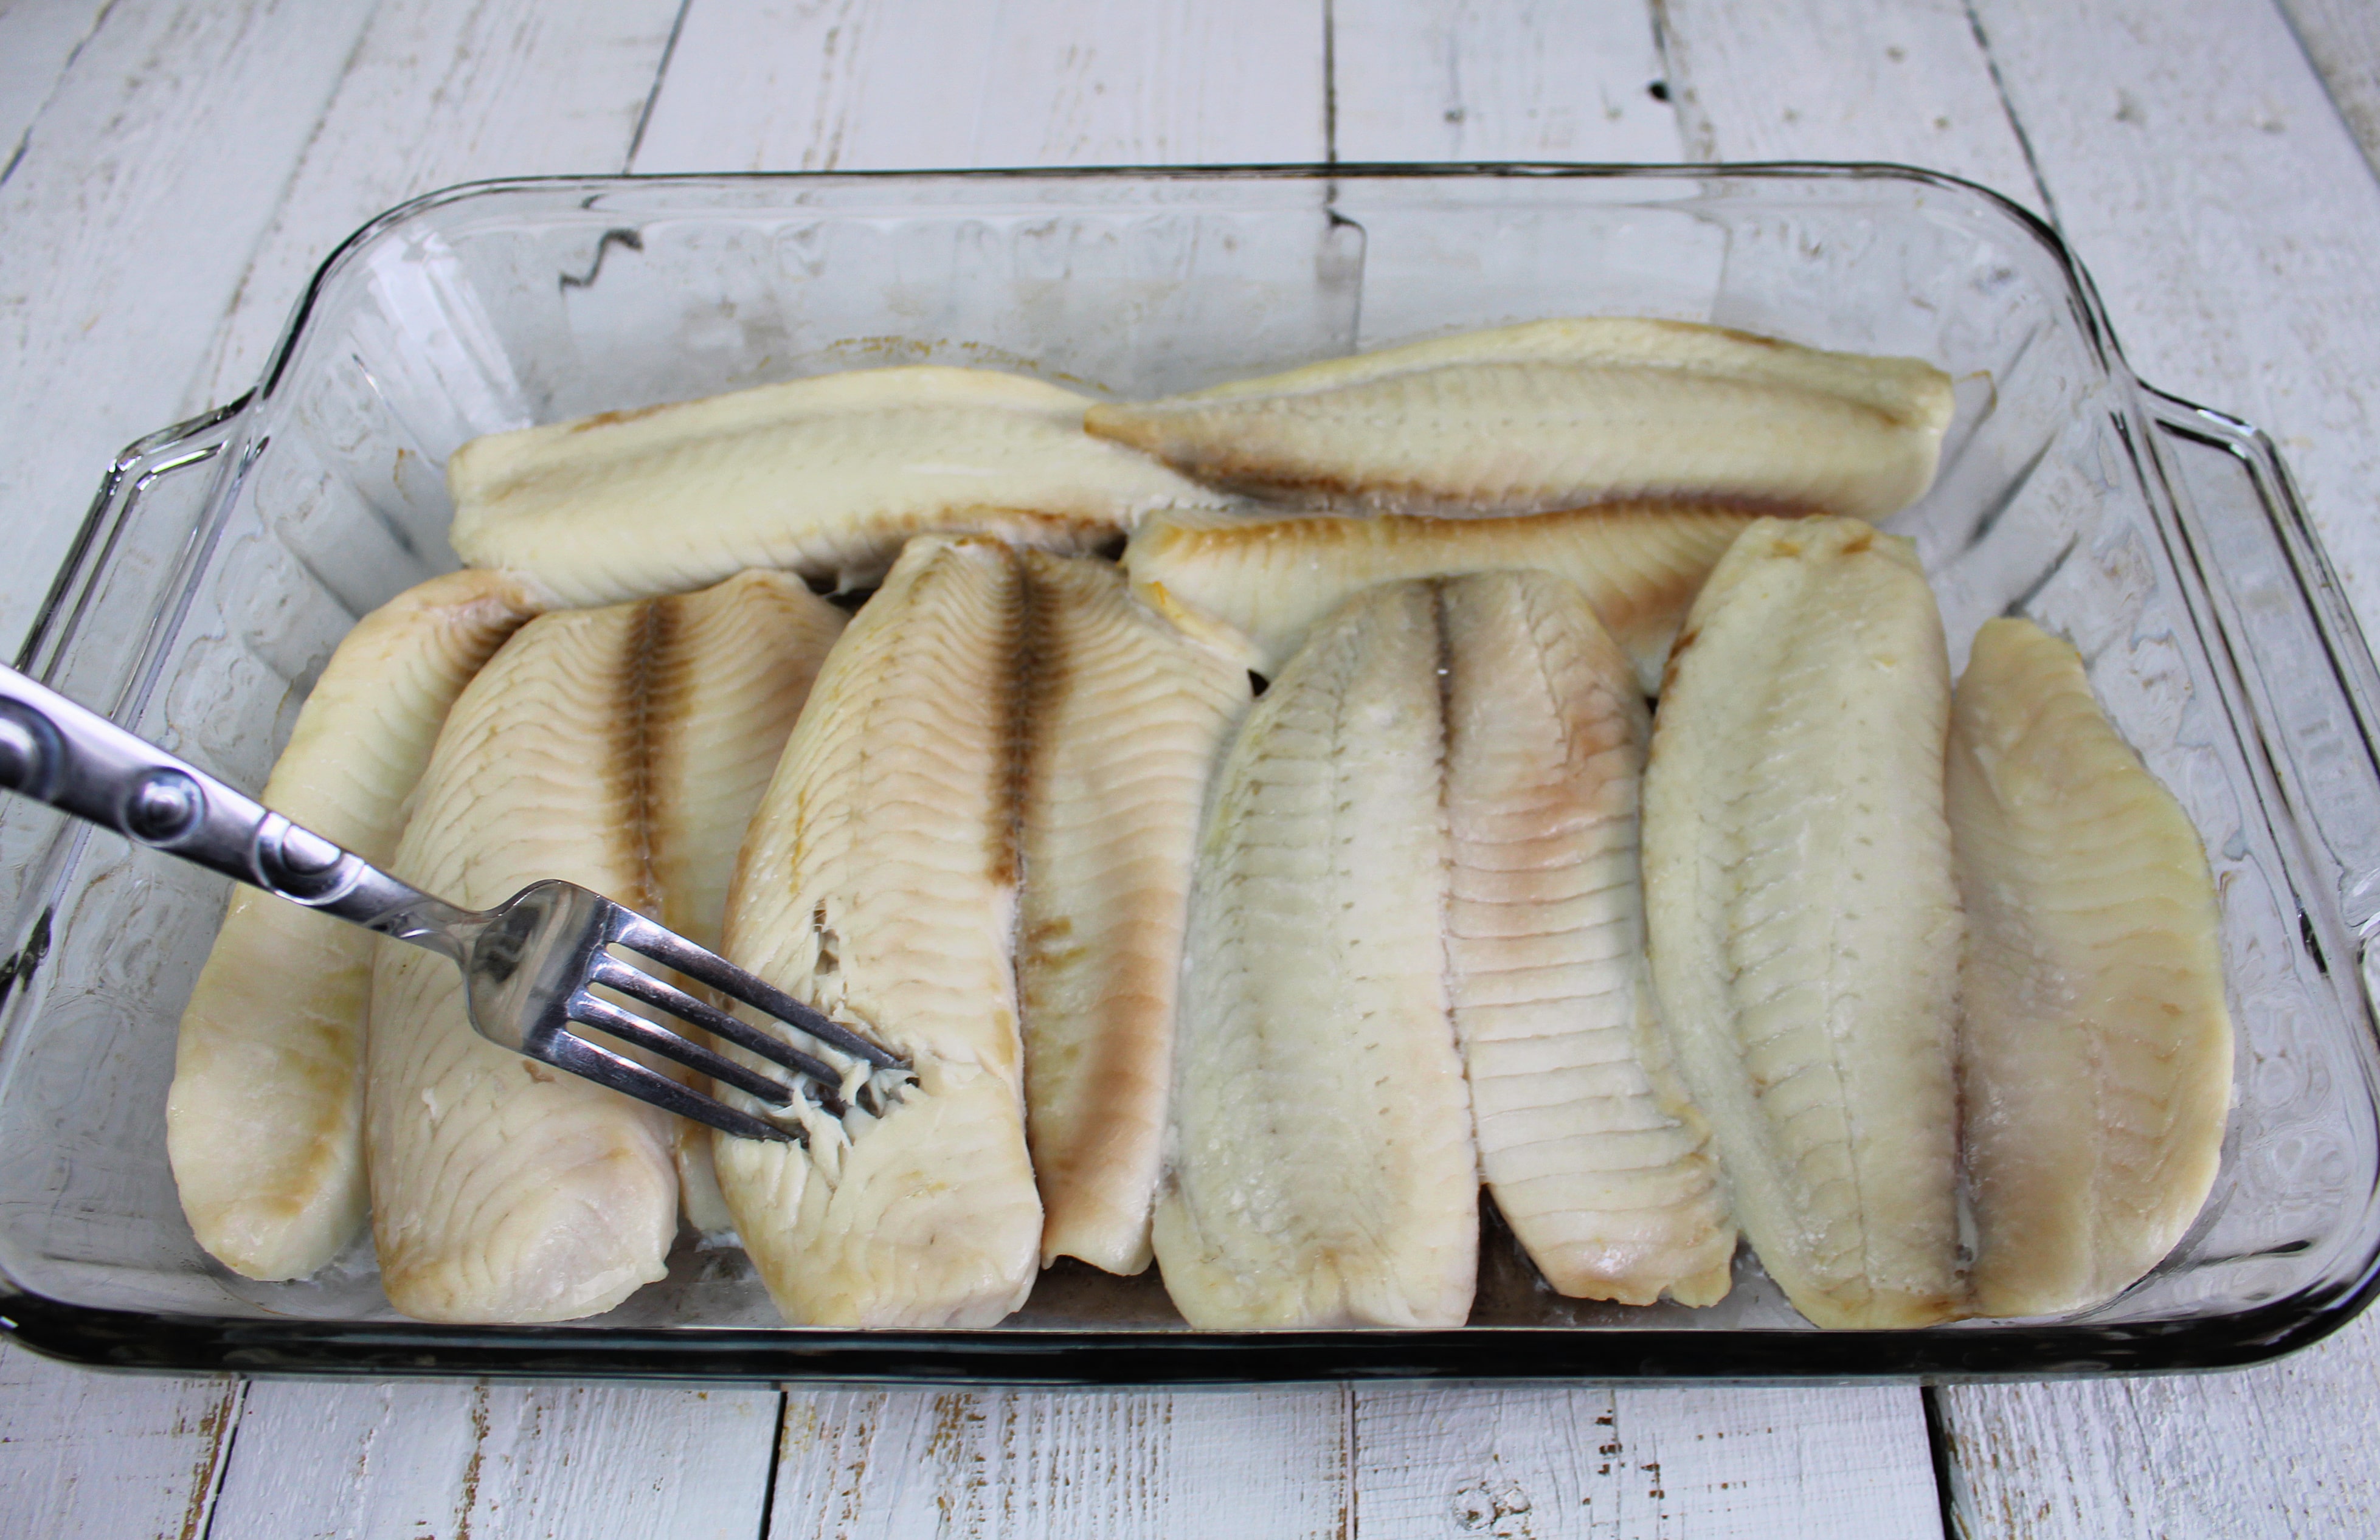 Broil fish until it flakes with a fork.